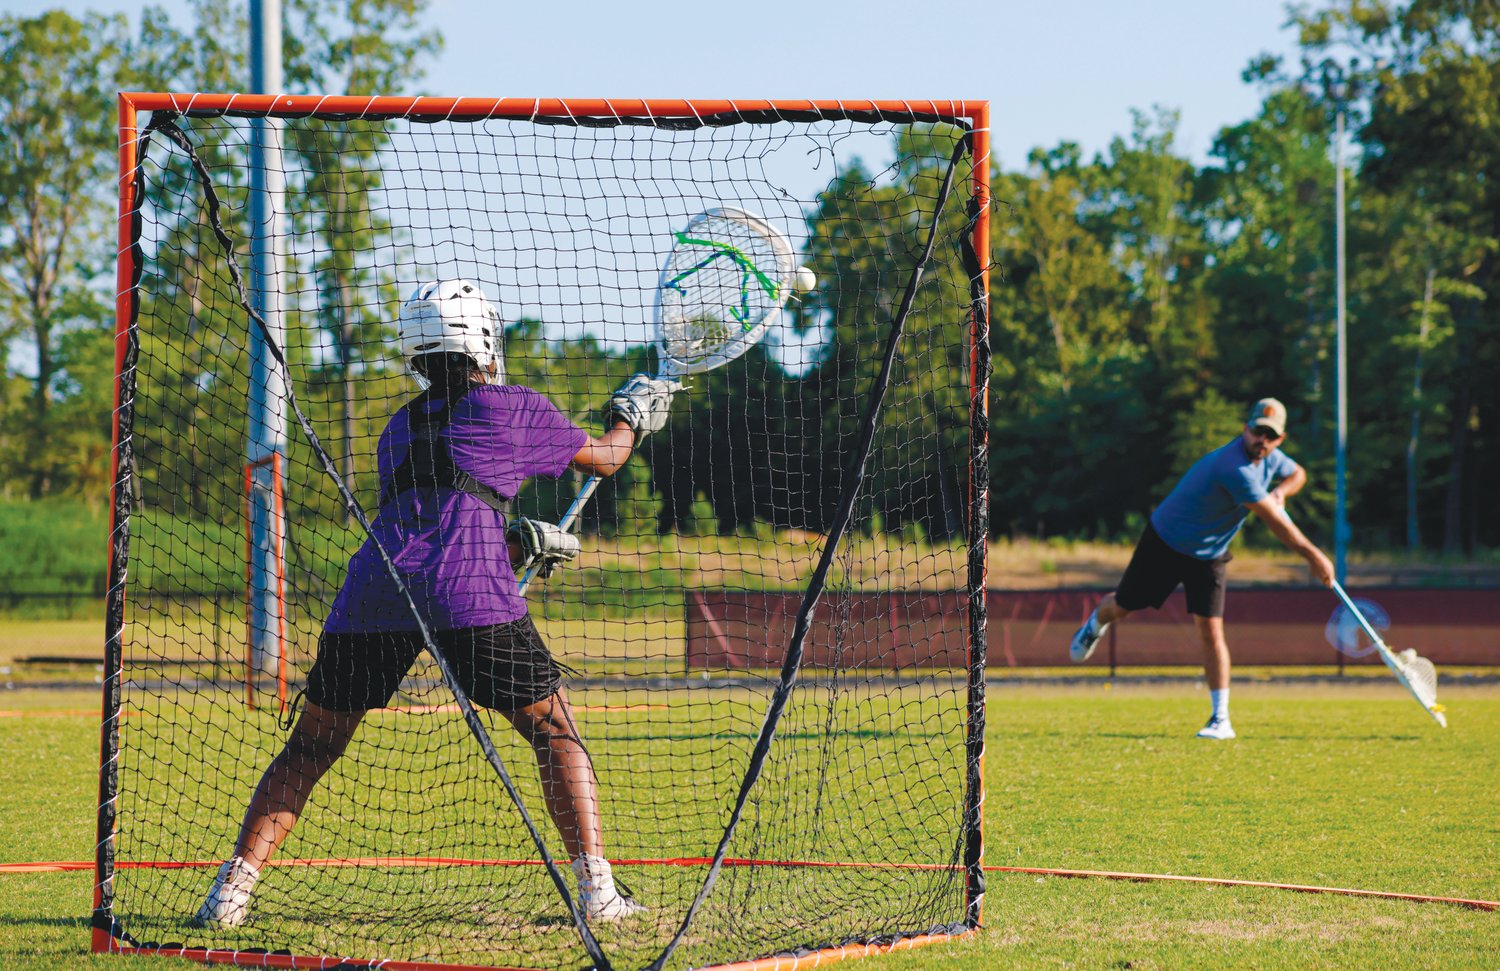 Seaforth camper Jasmine Lawrence (in purple) stands in goal and attempts to save a shot during the Hawks' youth lacrosse camp last Thursday.